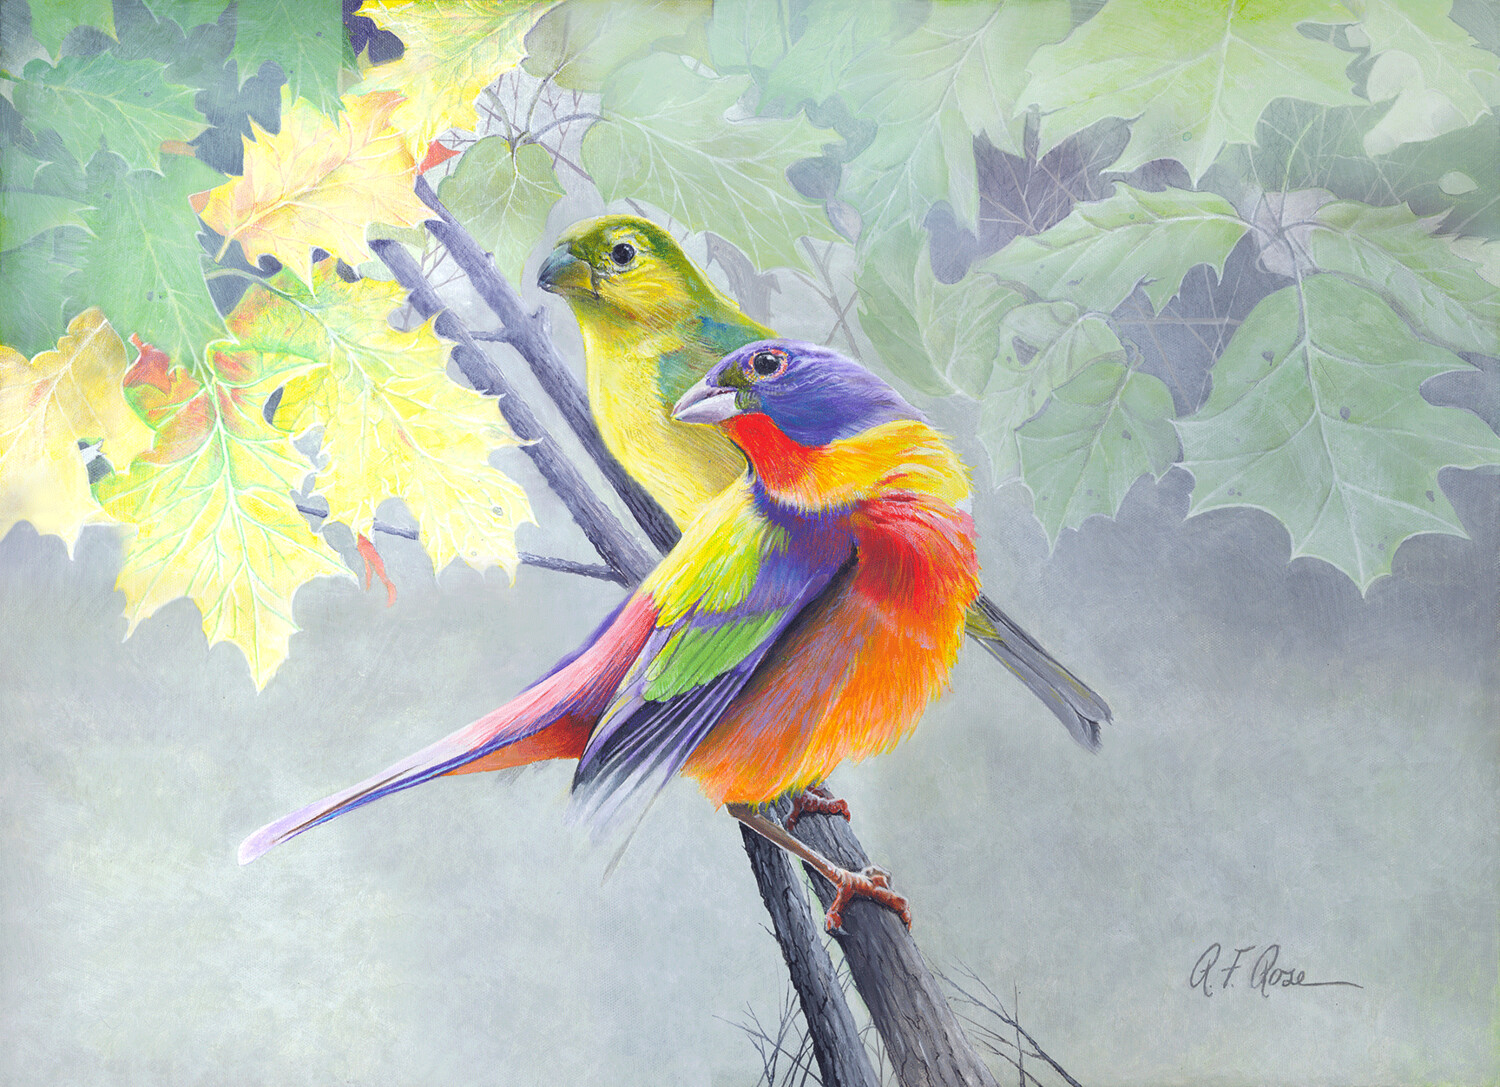 "Painted Bunting" by Richard F. Rose